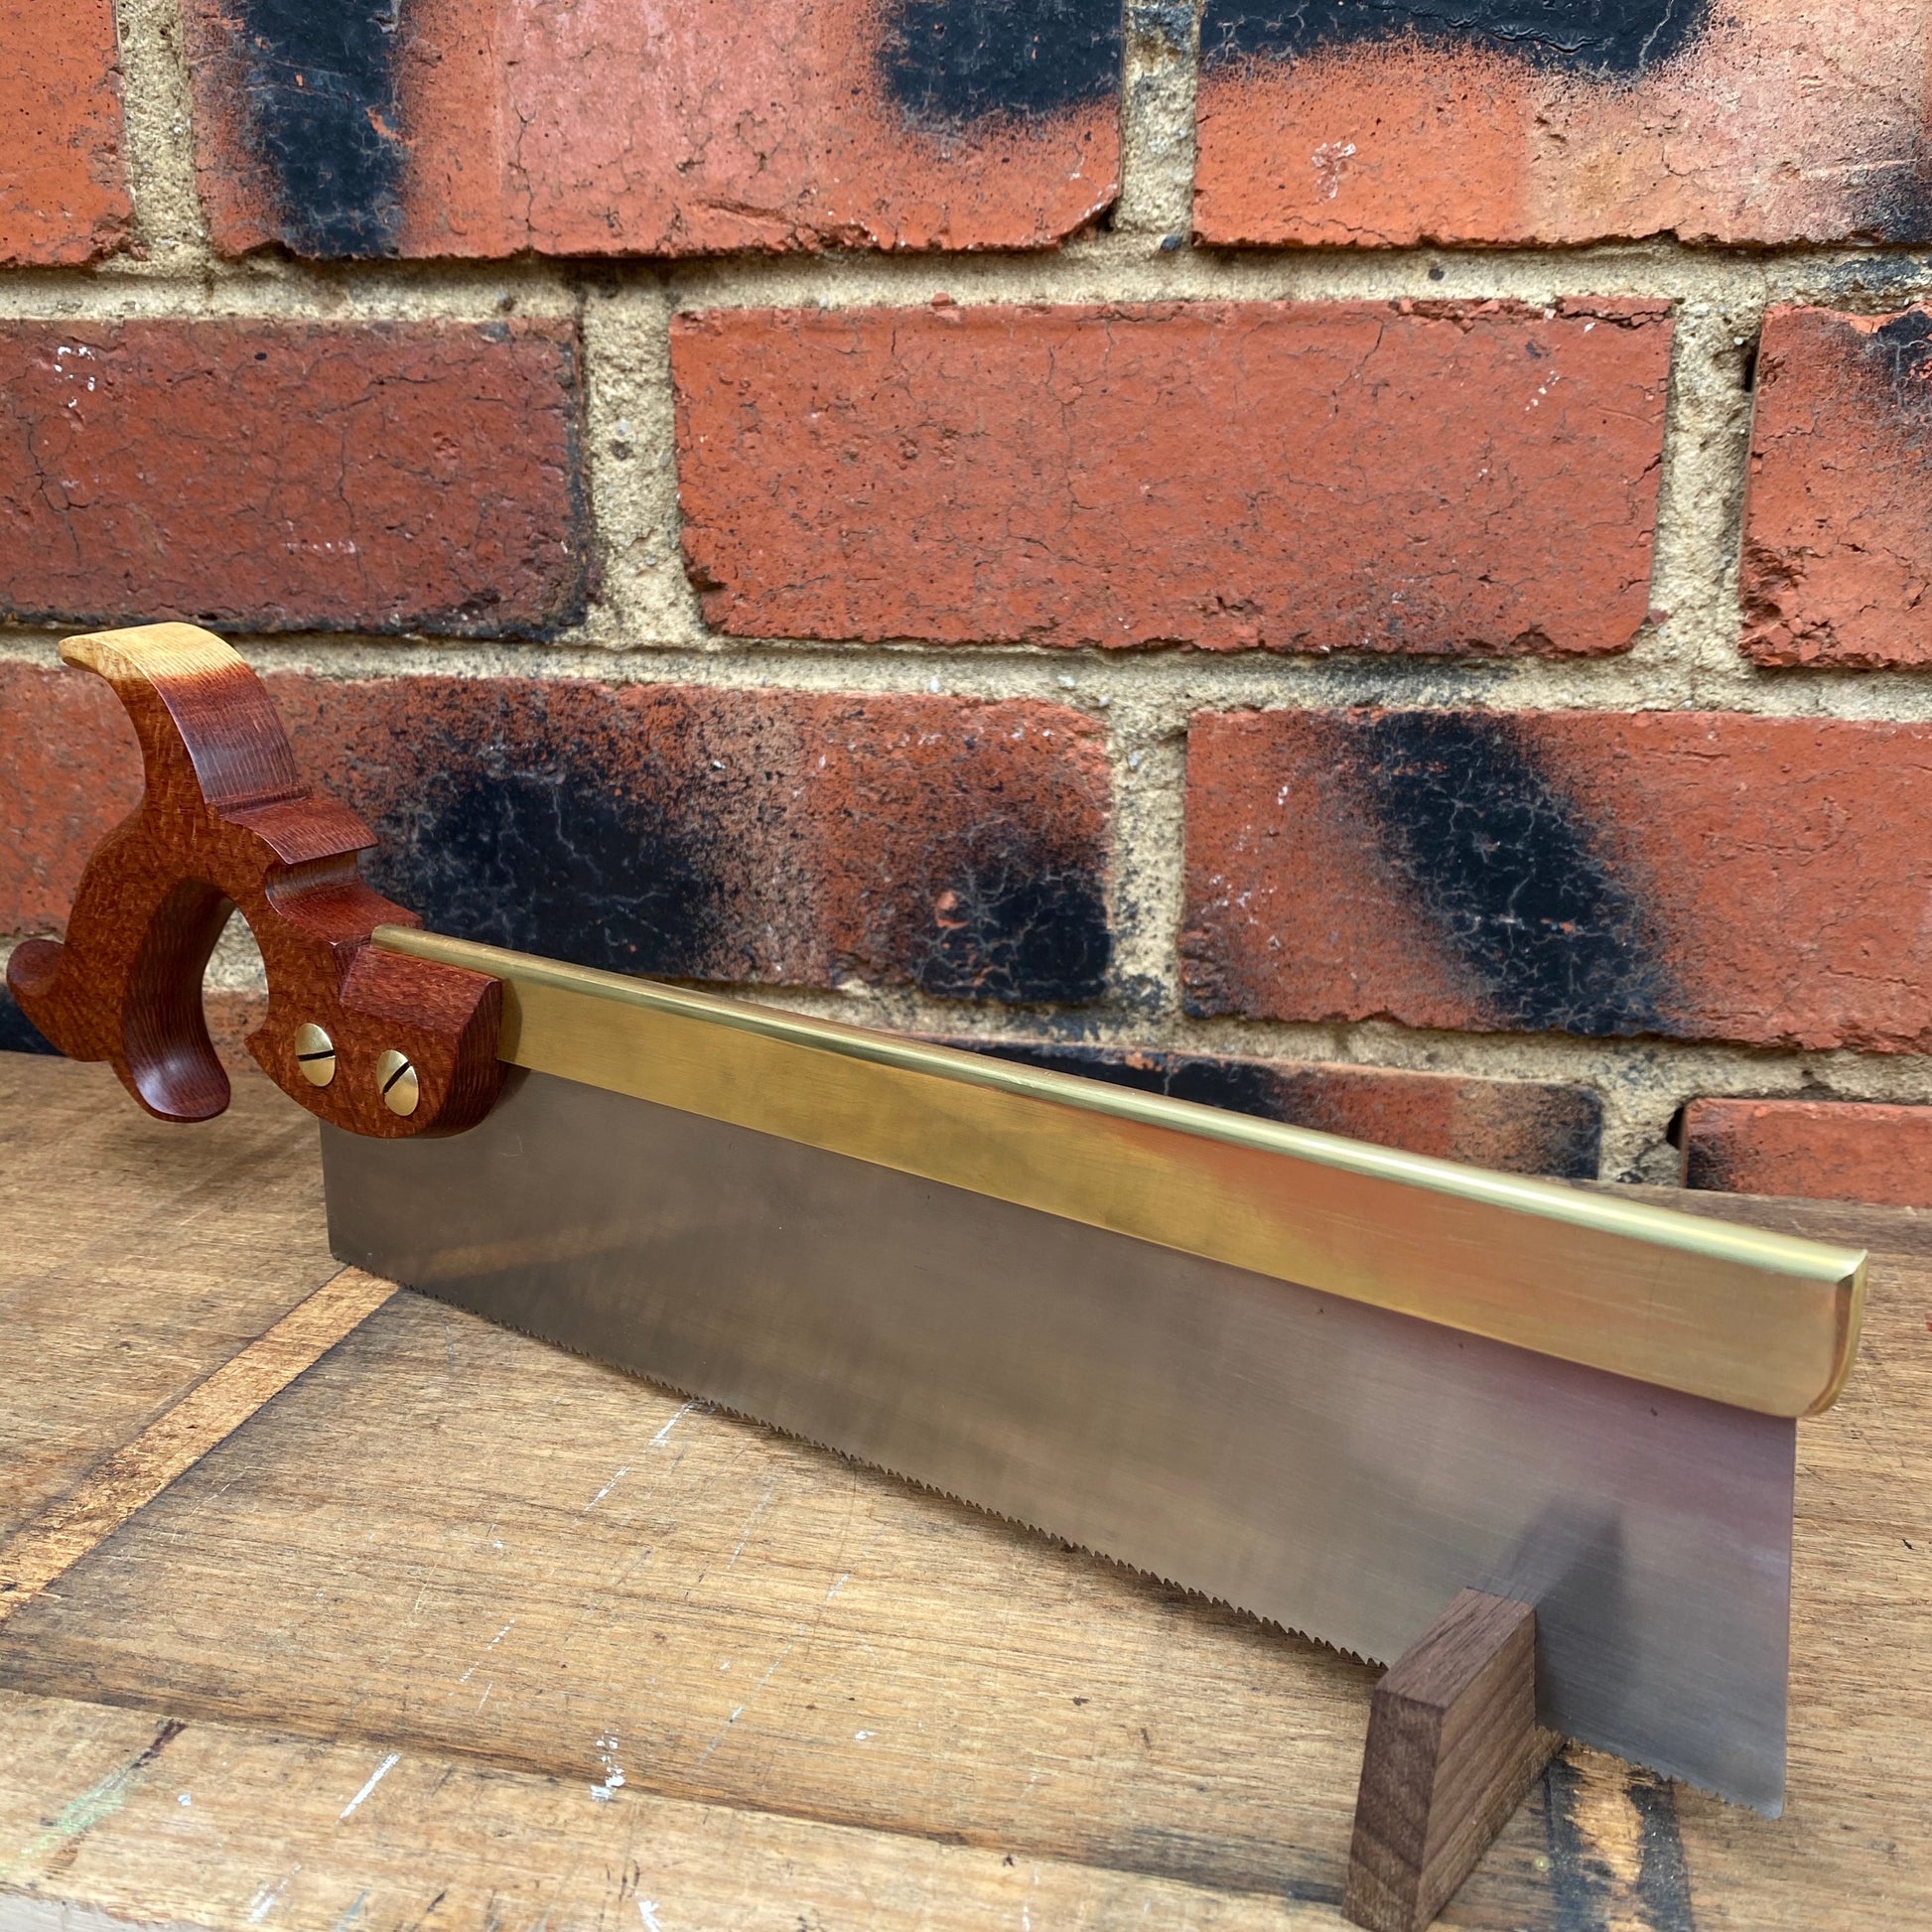 A HERITAGE SAWS Custom FITZROY model CARCASS SAW with Australian BEEFWOOD Melbourne hand made saw